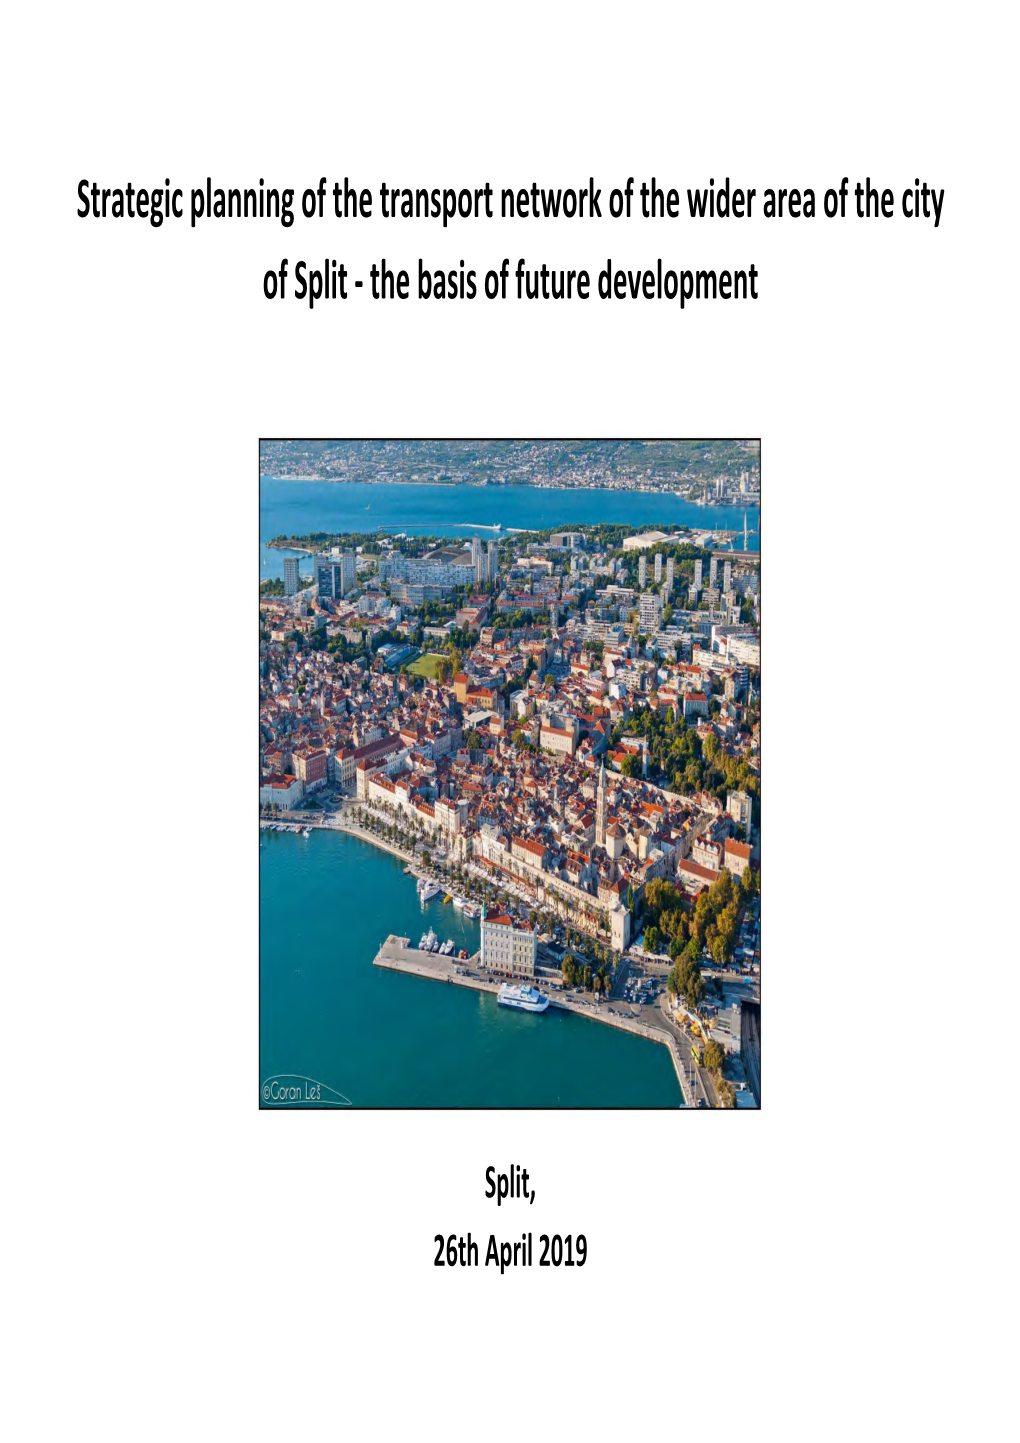 Strategic Planning of the Transport Network of the Wider Area of the City of Split - the Basis of Future Development